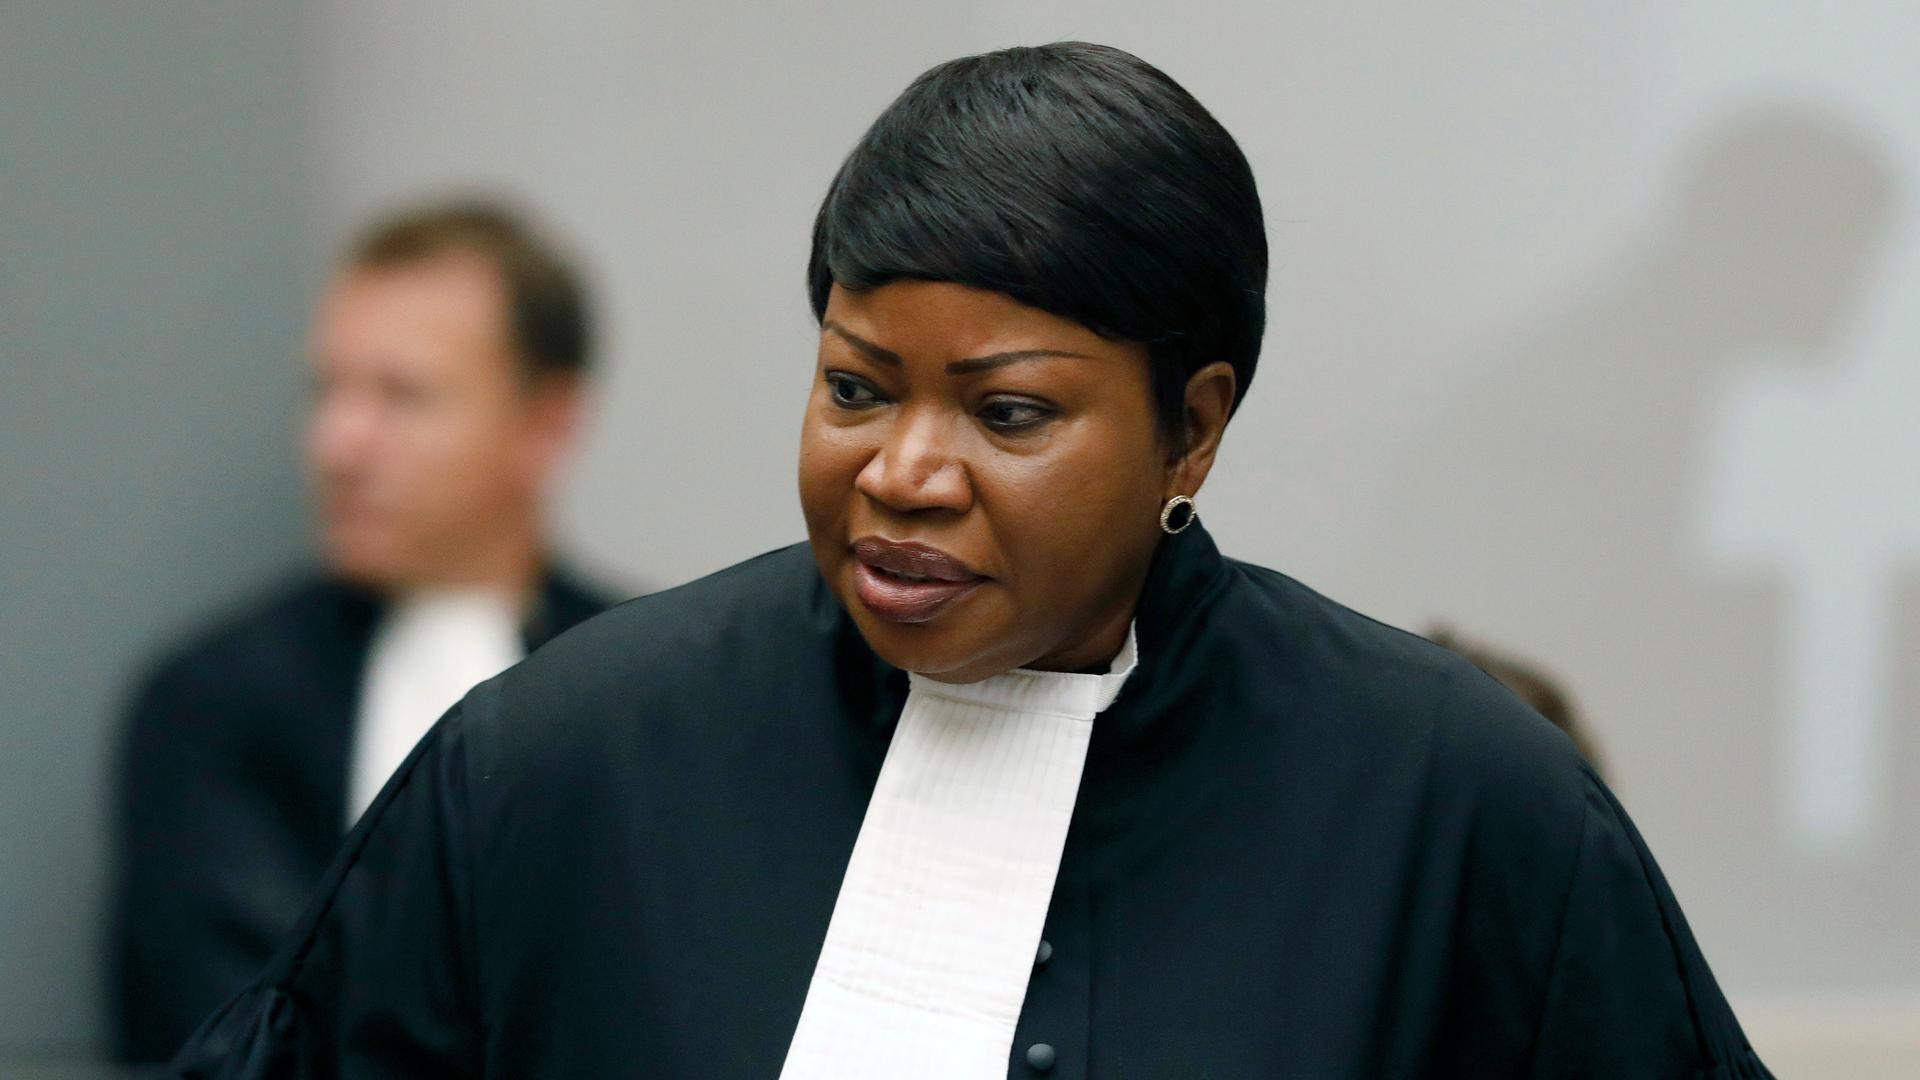 Prosecutor Fatou Bensouda speaks at the International Criminal Court (ICC) in The Hague, Netherlands, in this this Aug. 28, 2018, file photo.